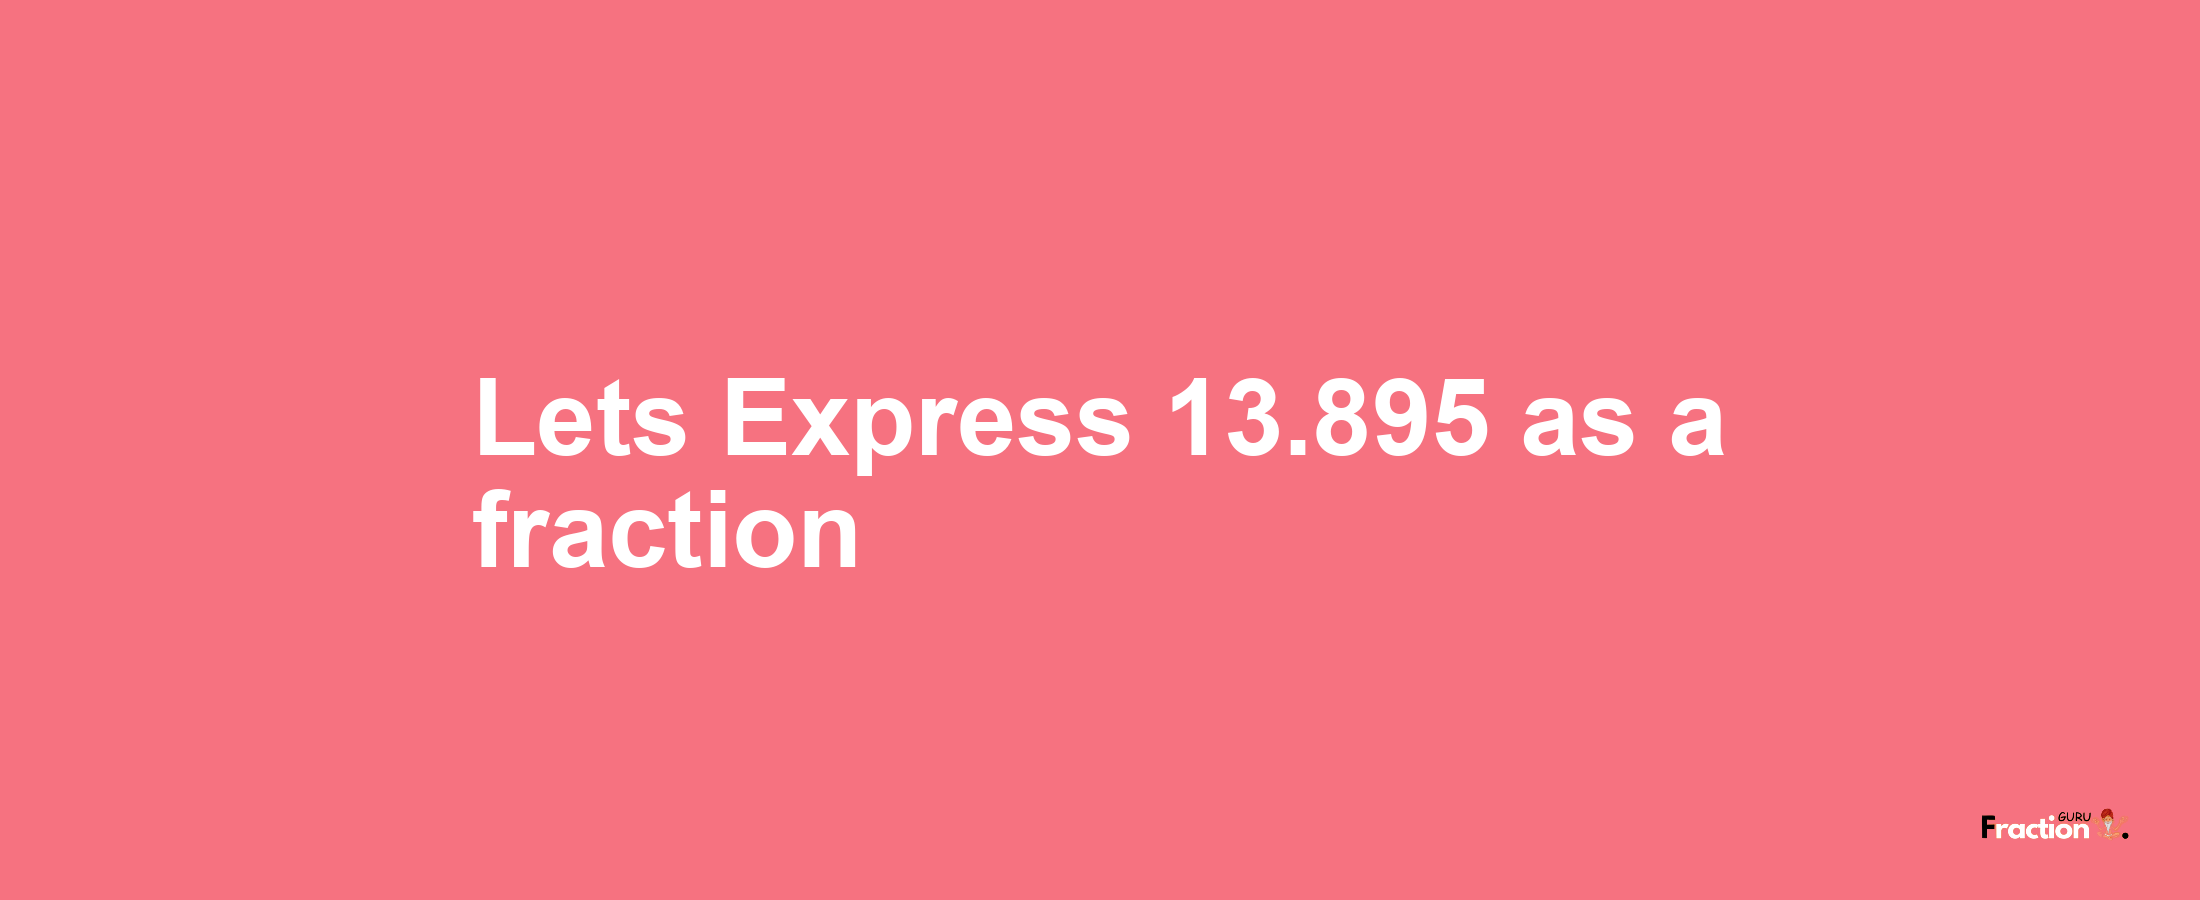 Lets Express 13.895 as afraction